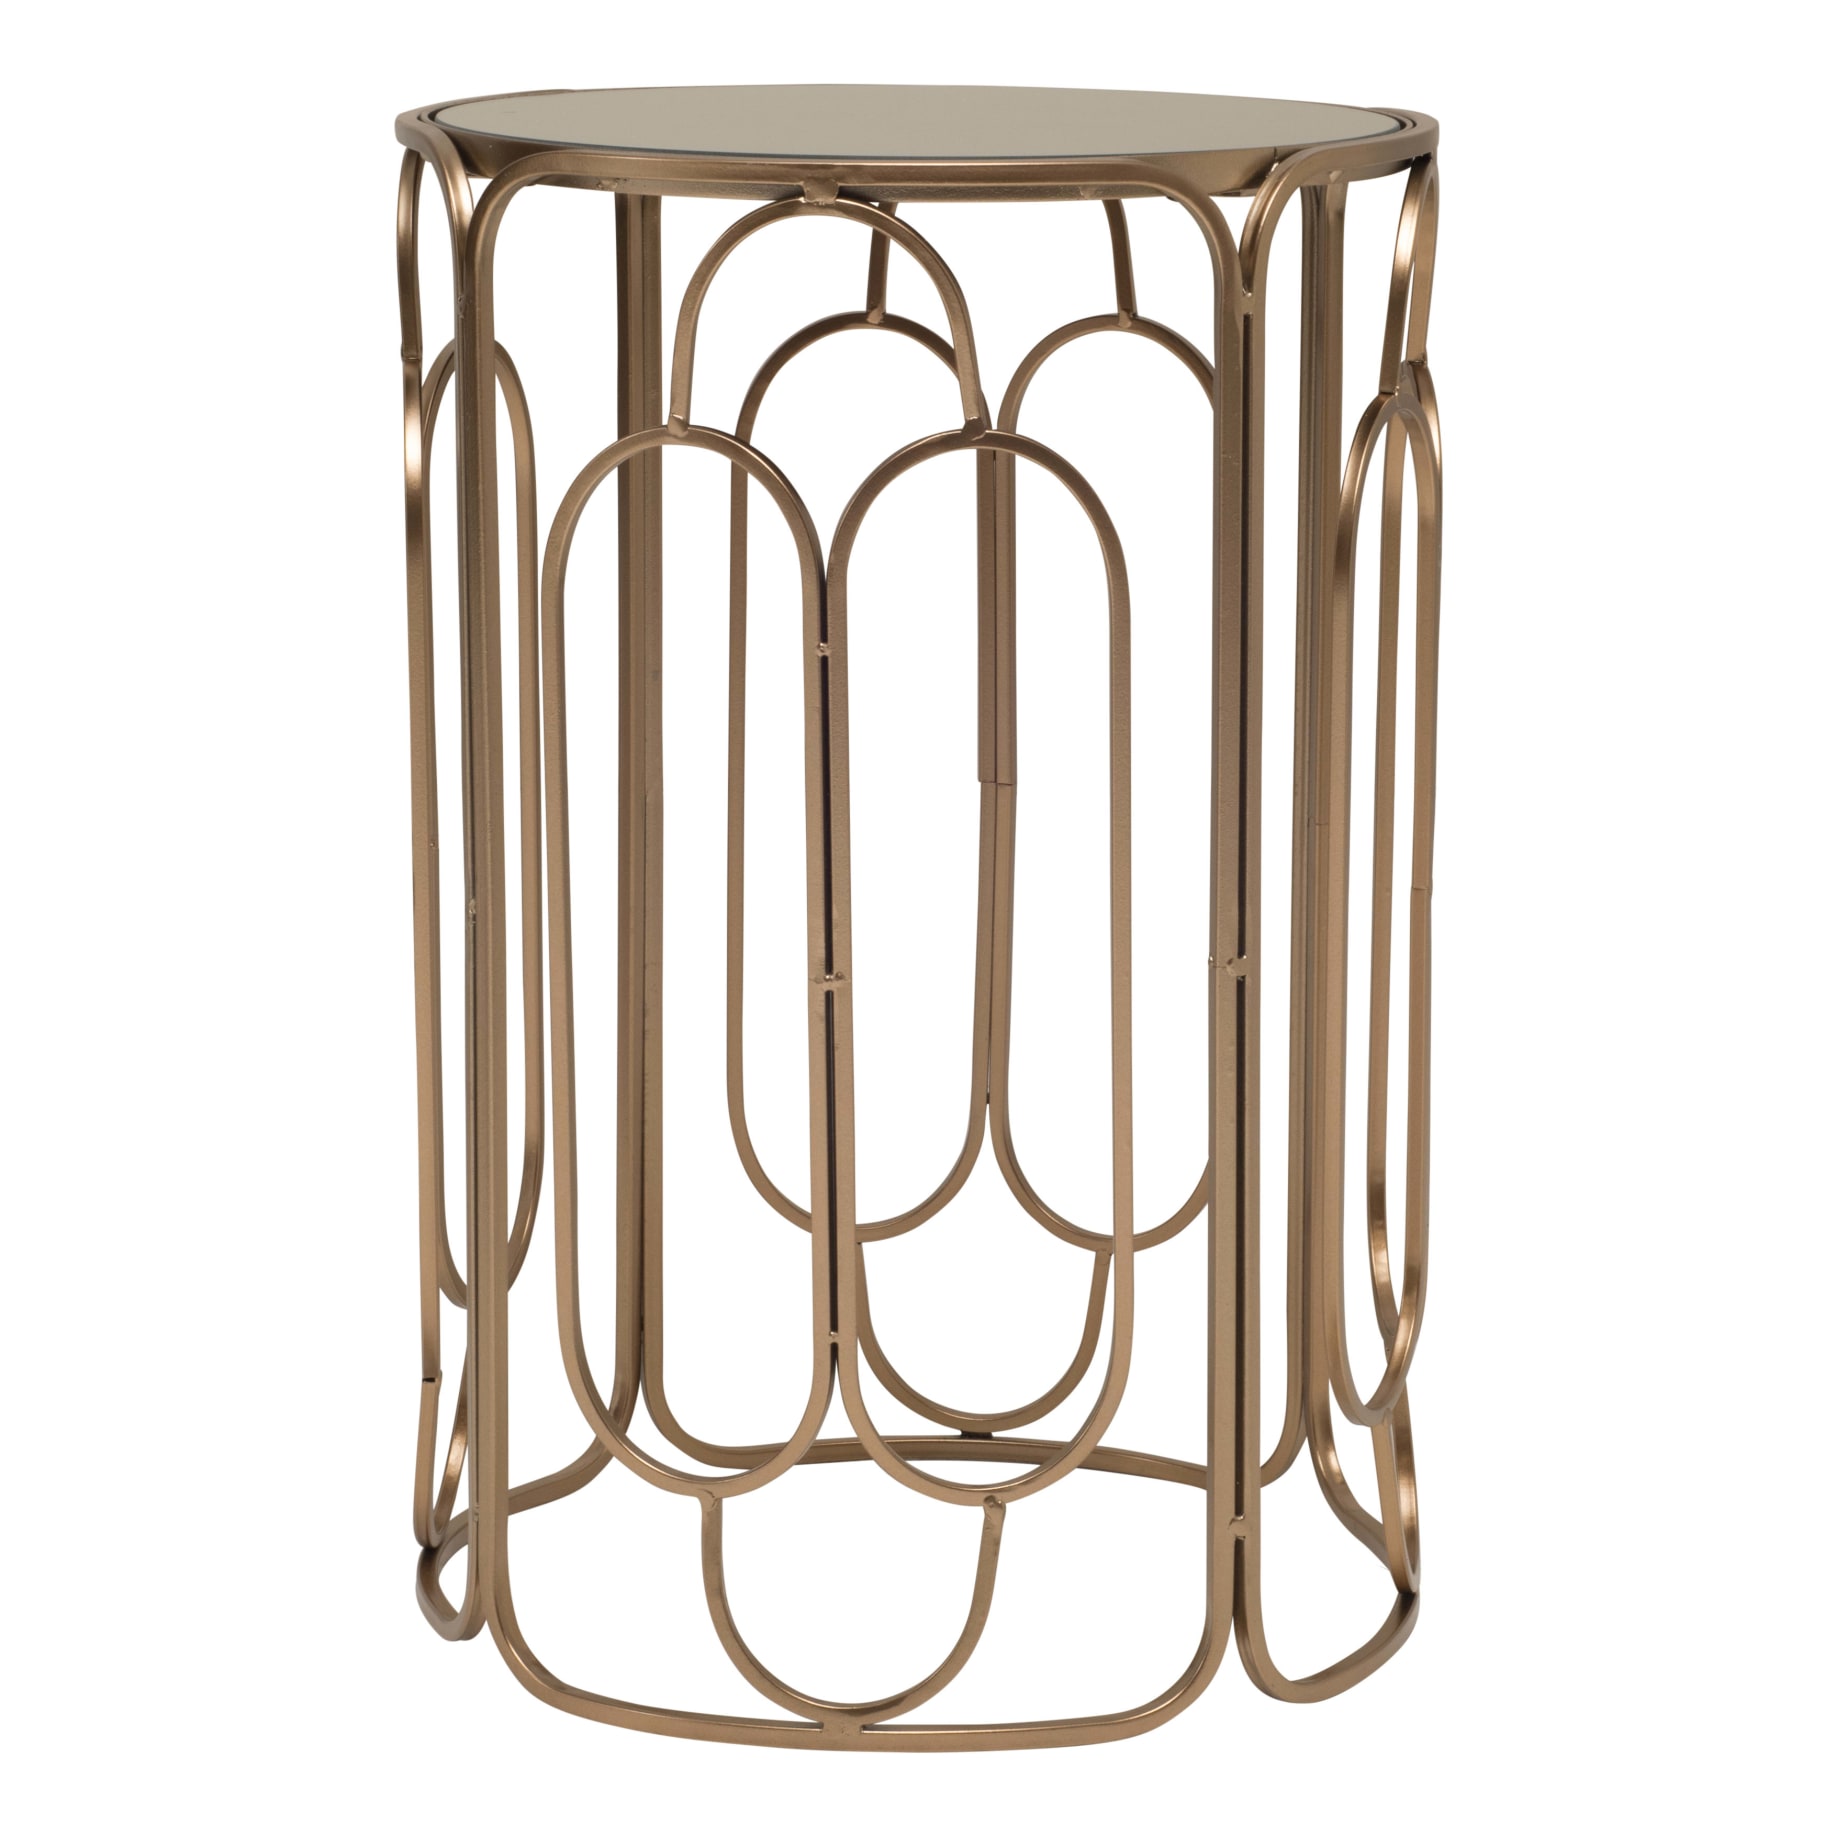 Celeste Round Side Table High 41.5cm in Copper Gold / Mirror